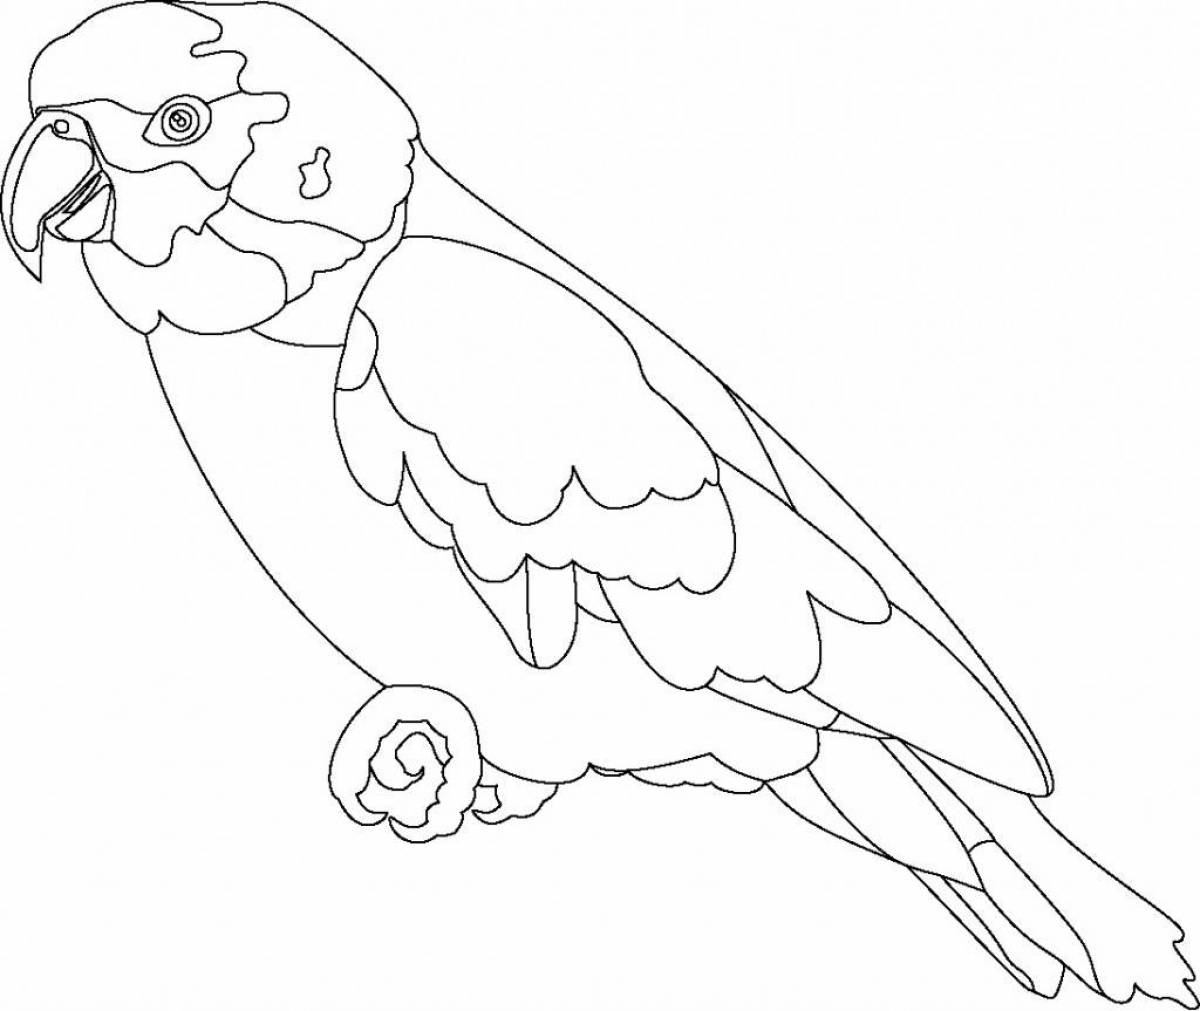 Adorable budgie coloring page